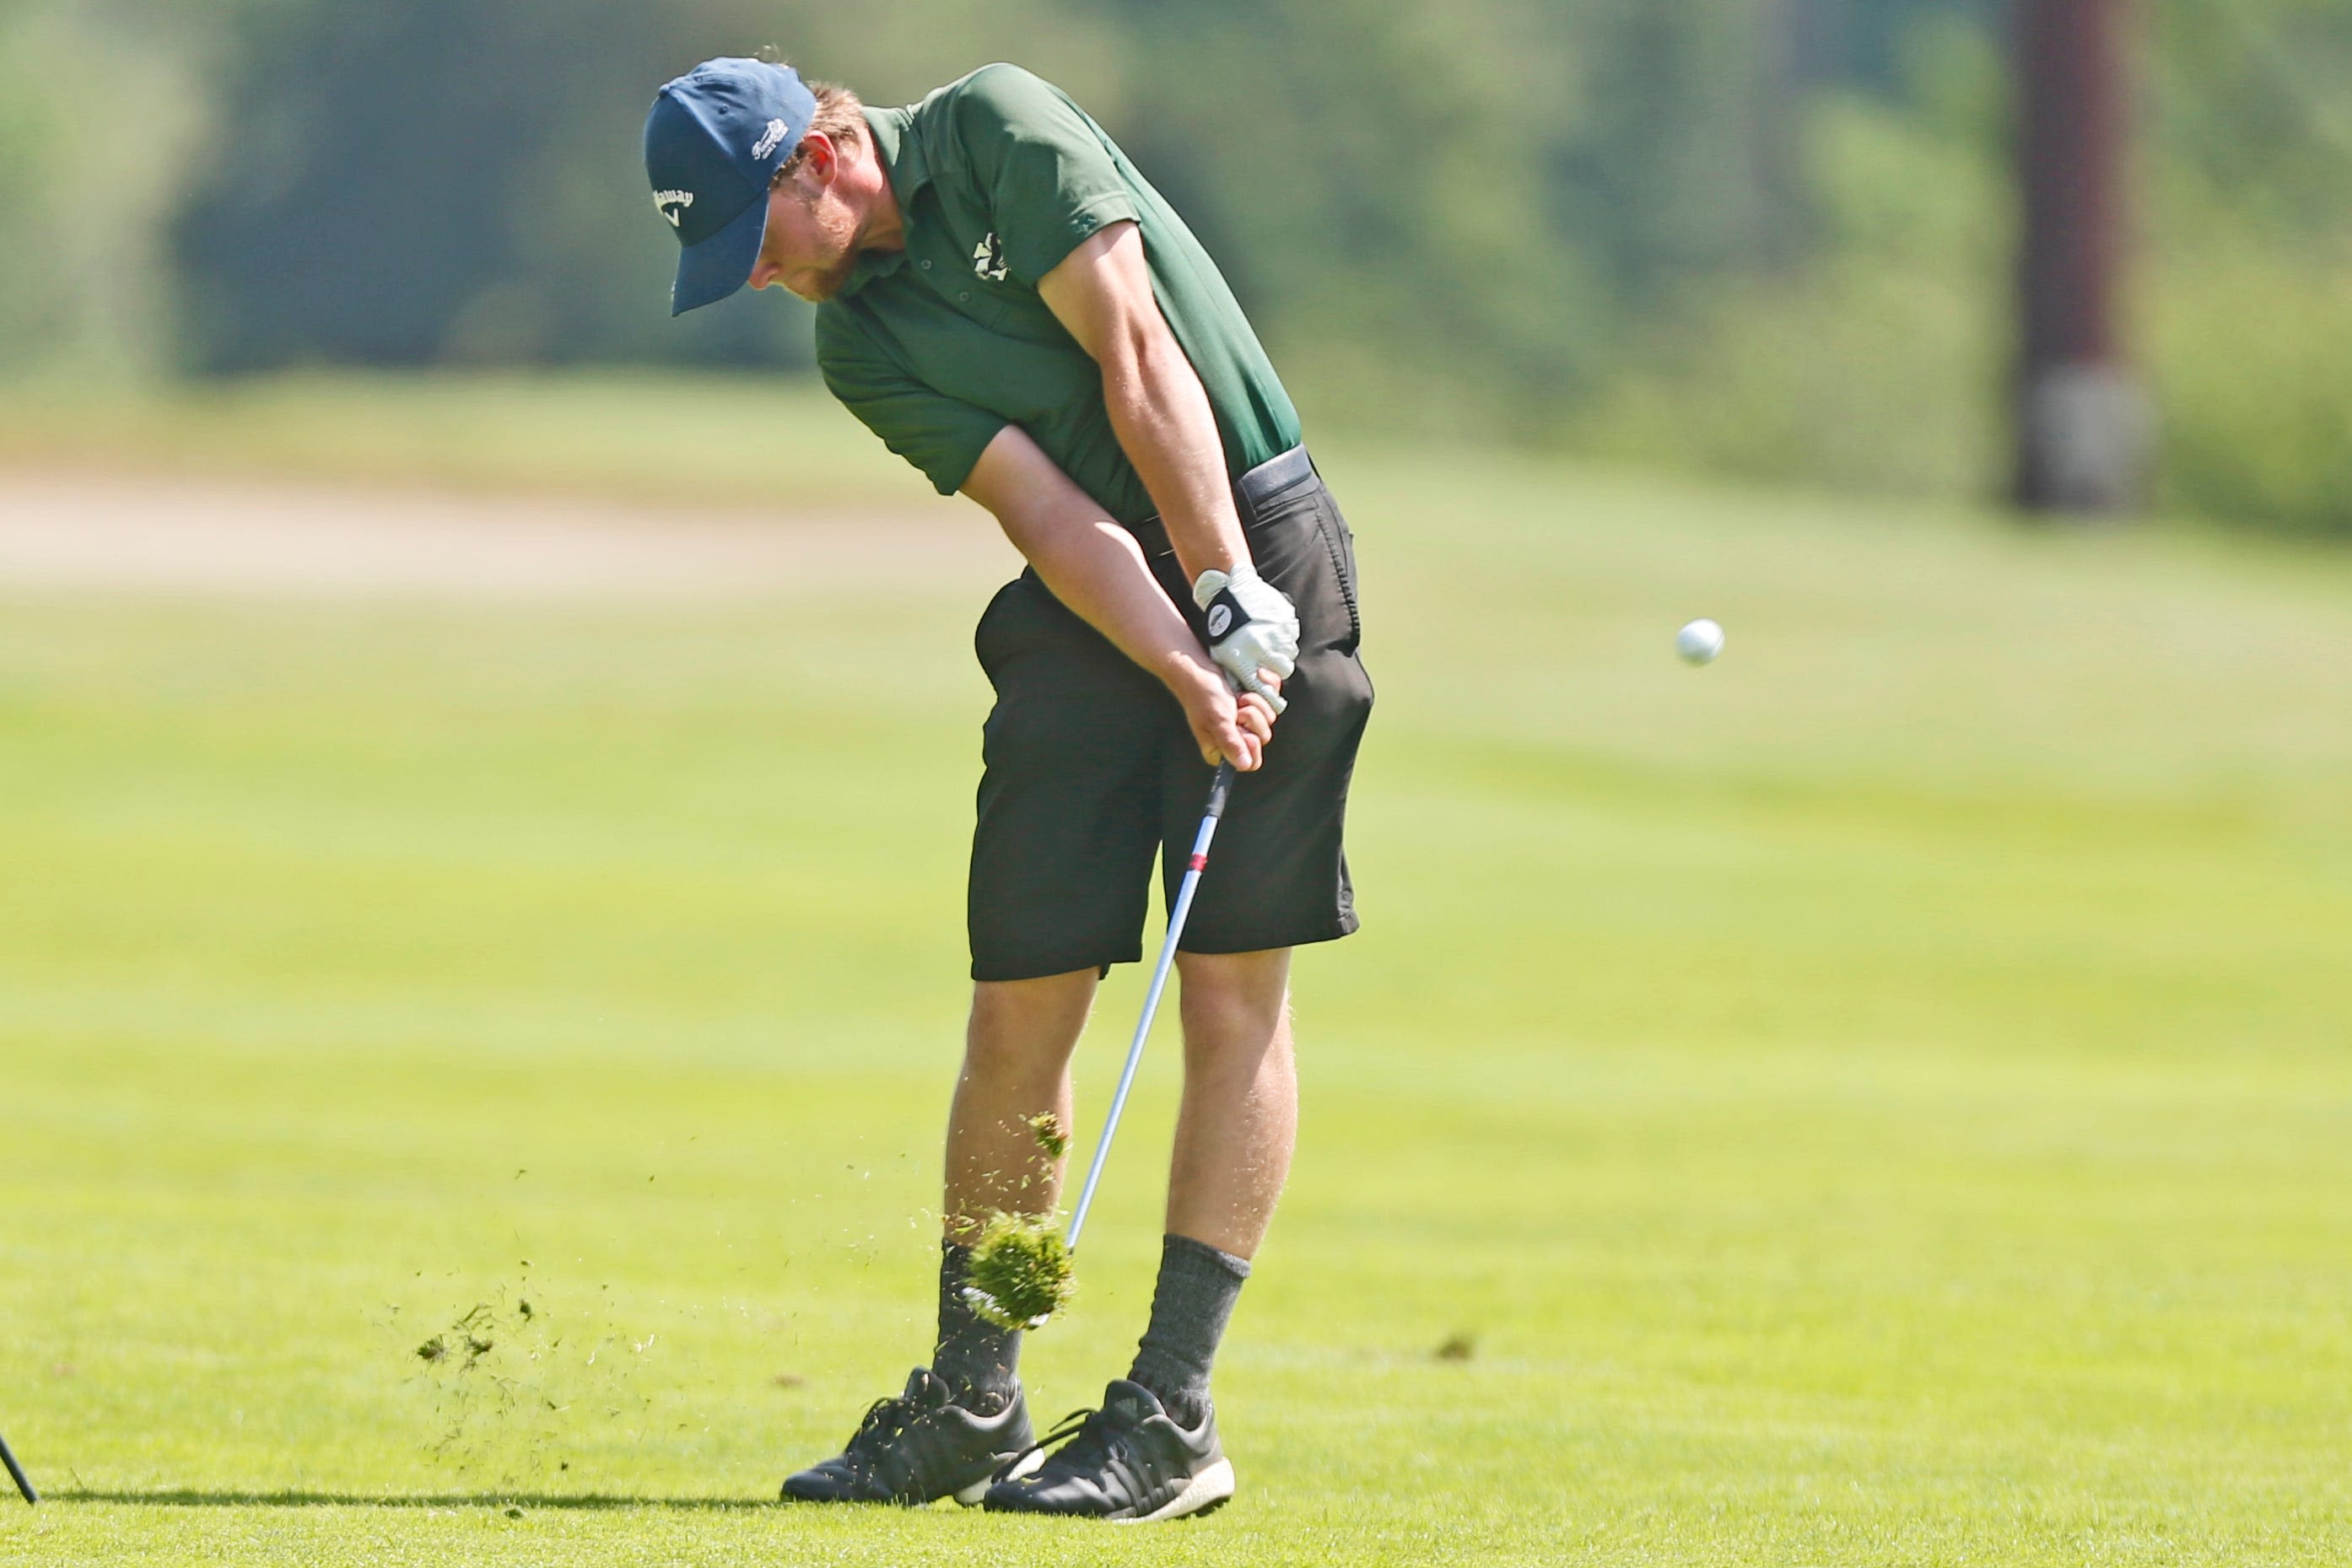 More drama at the Rhode Island Junior Amateur quarterfinal match play. Here's what happened.